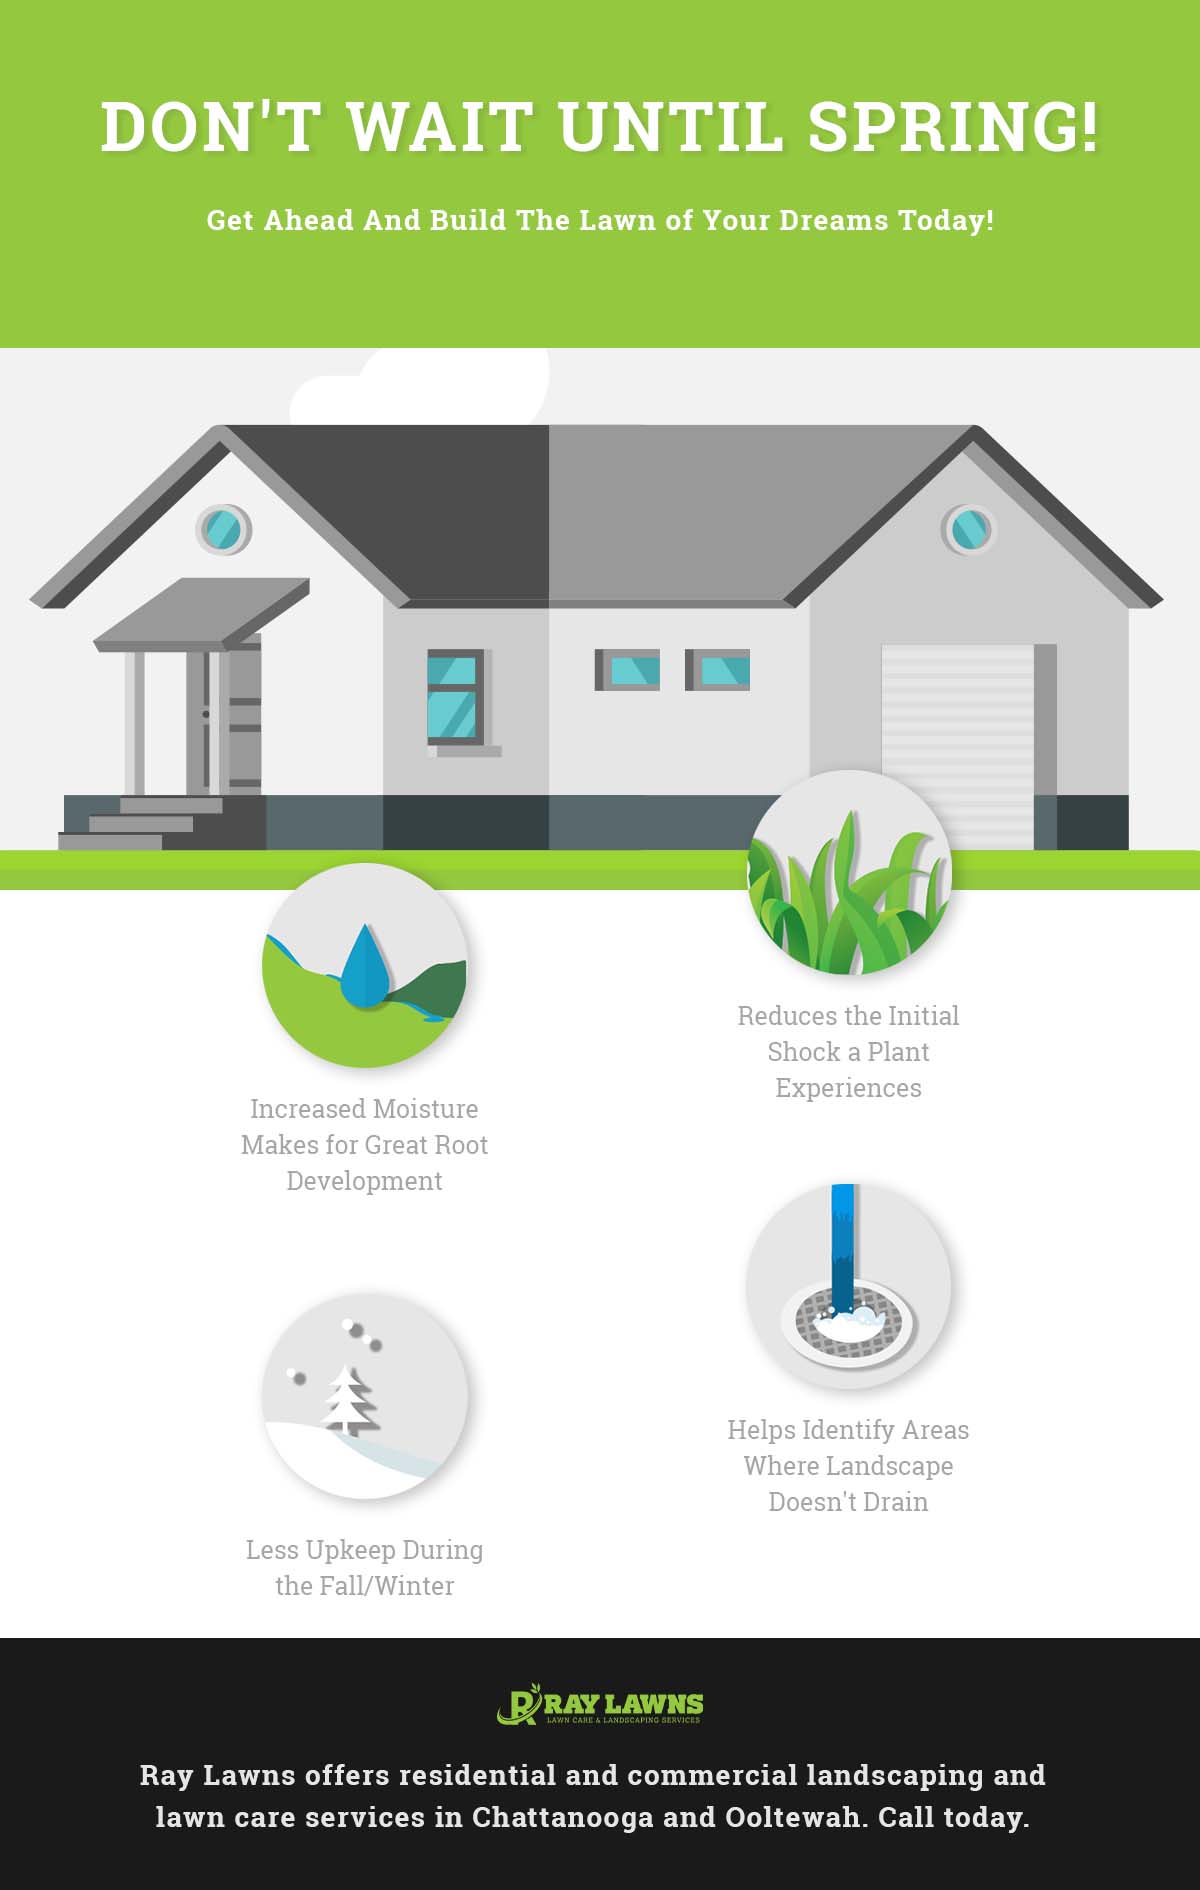 Dont-Wait-Until-Spring-Get-Ahead-And-Build-The-Lawn-of-Your-Dreams-Today-Infographic-61d87a7096a92